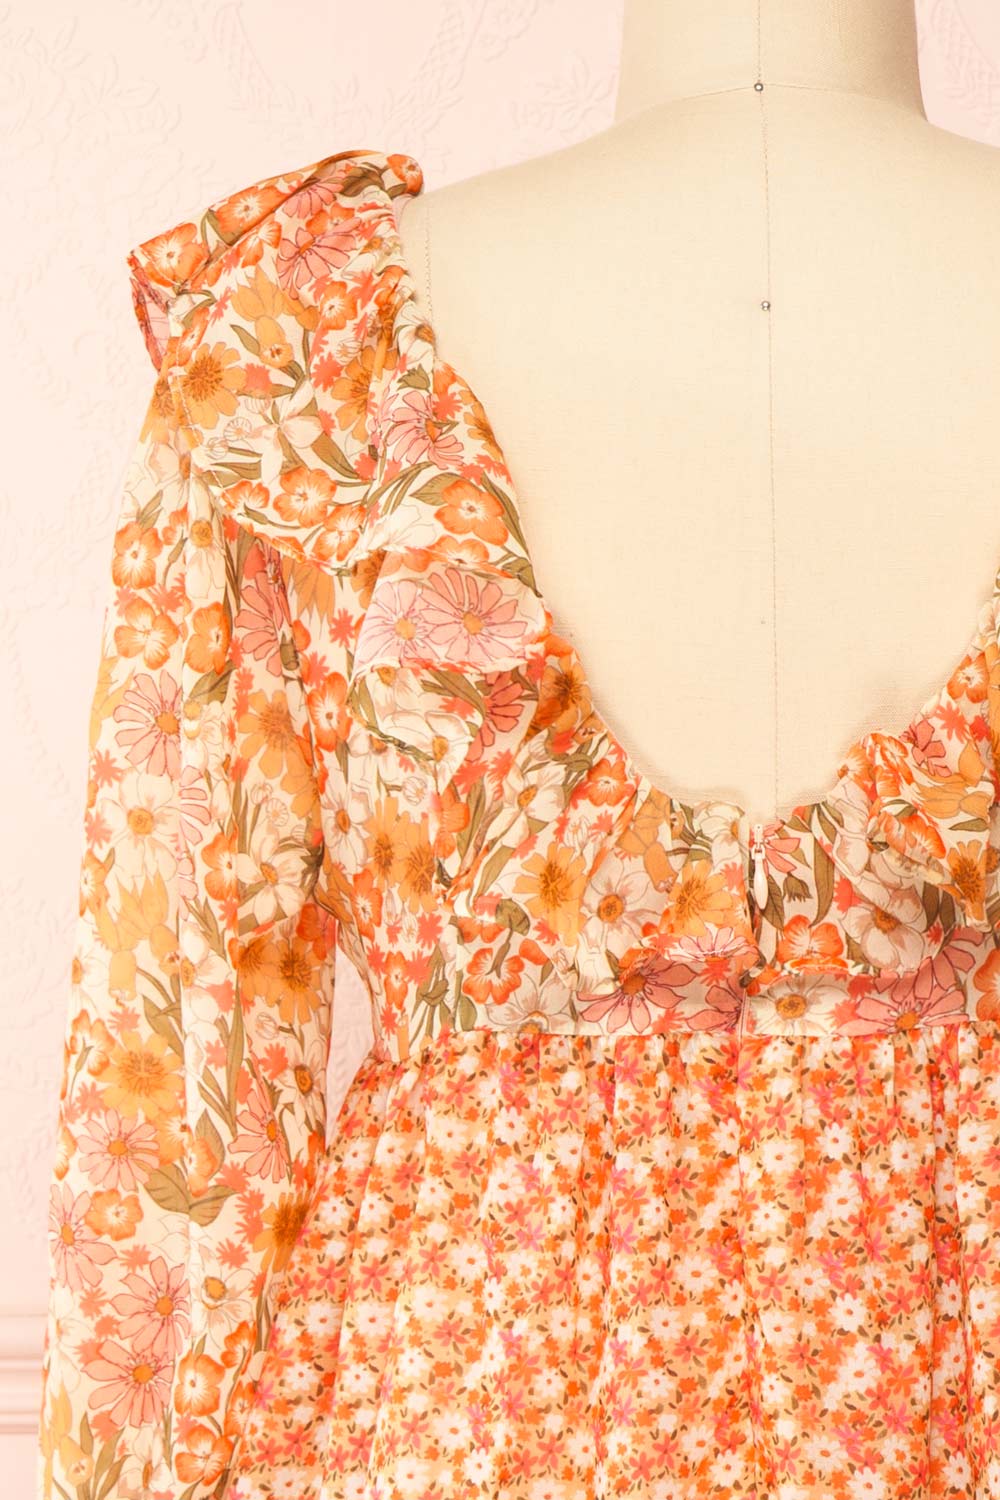 Kenza Floral Babydoll Dress w/ Puffy Sleeves | Boutique 1861 back close-up